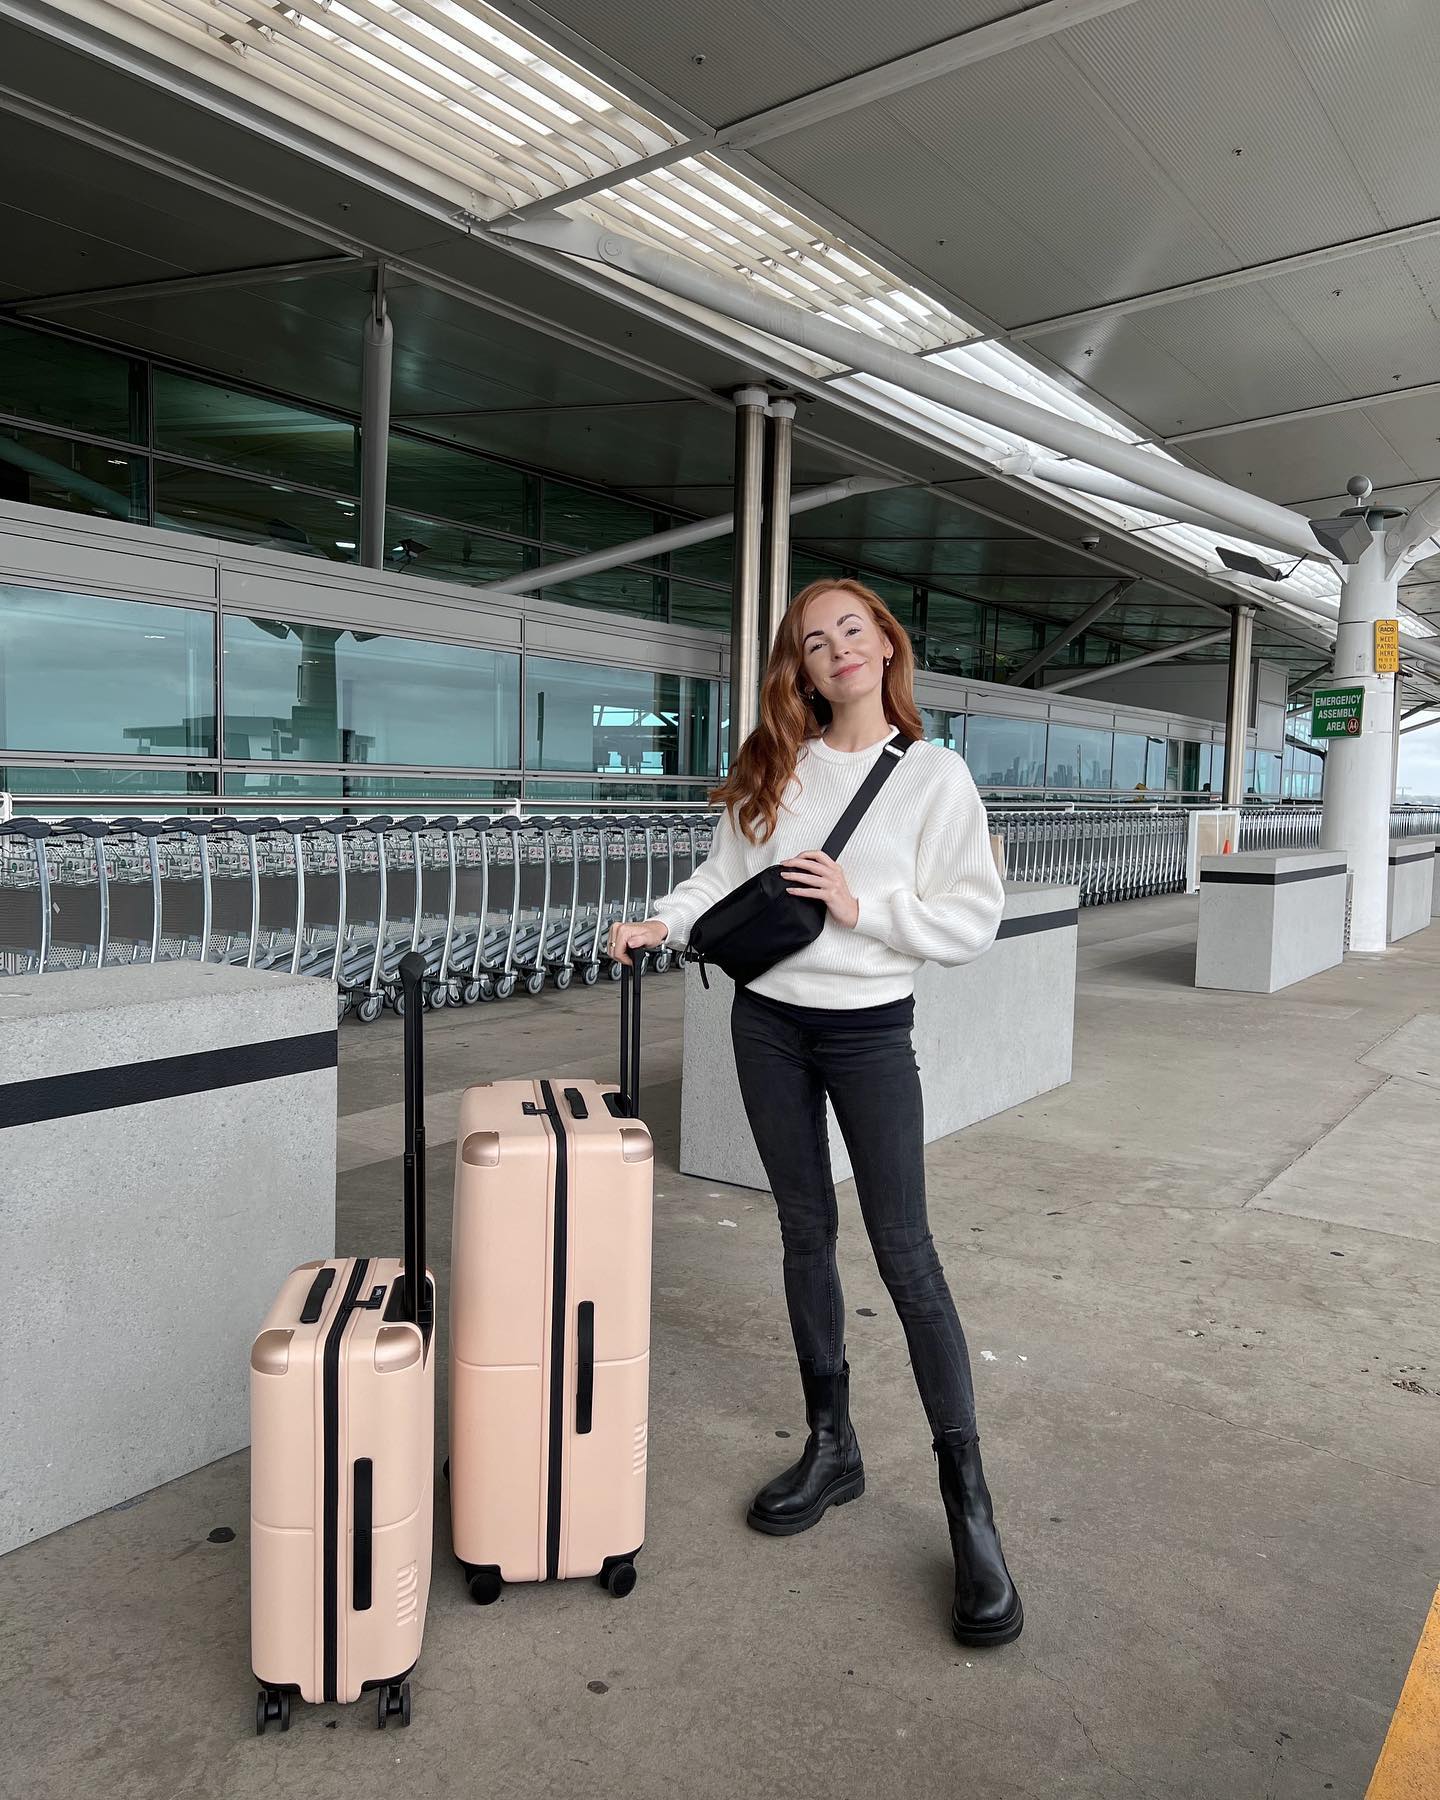 Brooke Saward travel influencer at the airport with her pink luggage